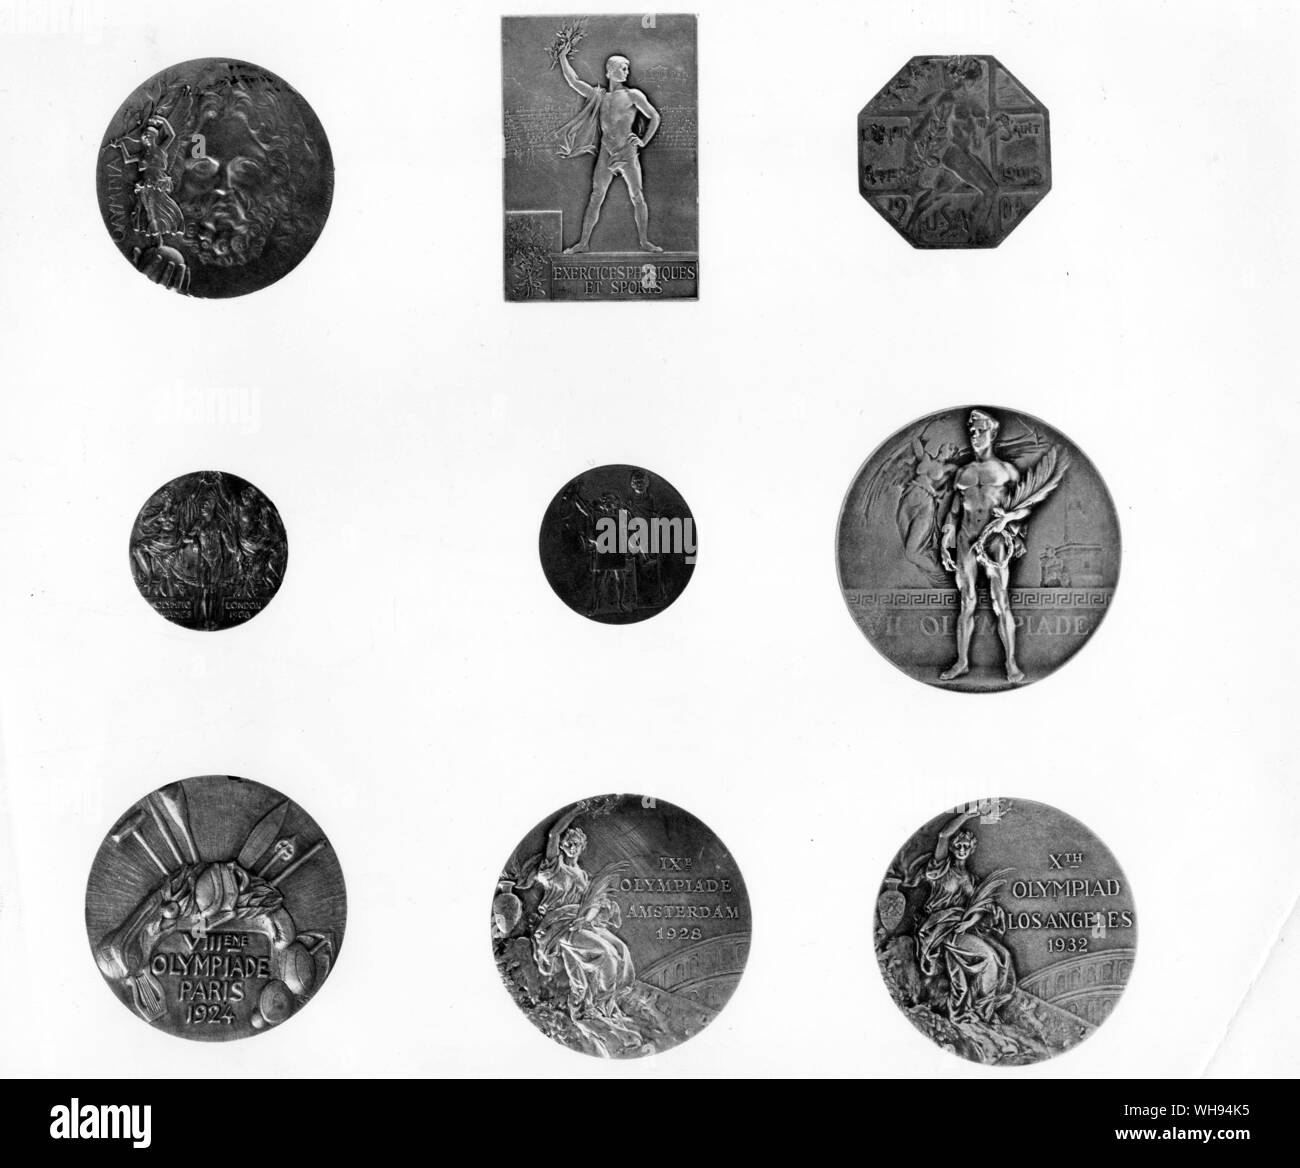 Official Olympic Medals 1896-1932: (l-r top): Greece Athens, 1896. France, Paris 1900. USA, St Louis, 1904. (l-r middle) Great Britain, London, 1908. Sweden, Stockholm, 1912. Belgium, Anvers, 1920. (l-r bottom) France, Paris, 1924. Netherlands, Amsterdam, 1928. USA, Los Angeles, 1932.. Stock Photo